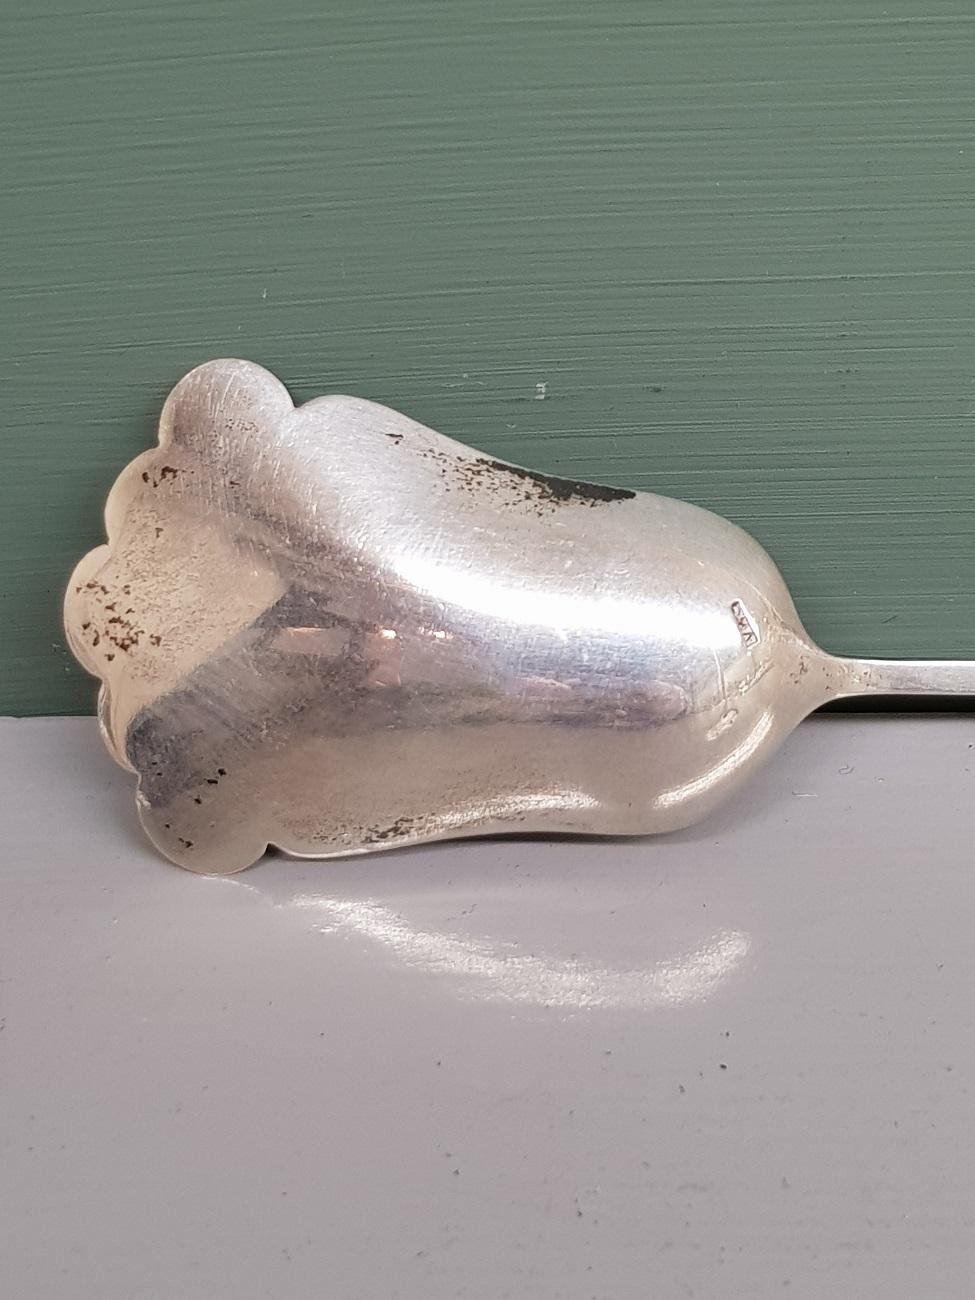 Old Dutch silver sugar spoon with a cut agate as a handle and it is marked with a sword and unknown maker's mark, early 20th century.

The measurements are,
Depth 1.5 cm/ 0.5 inch.
Width 3.3 cm/ 1.2 inch.
Height 12.2 cm/ 4.8 inch.